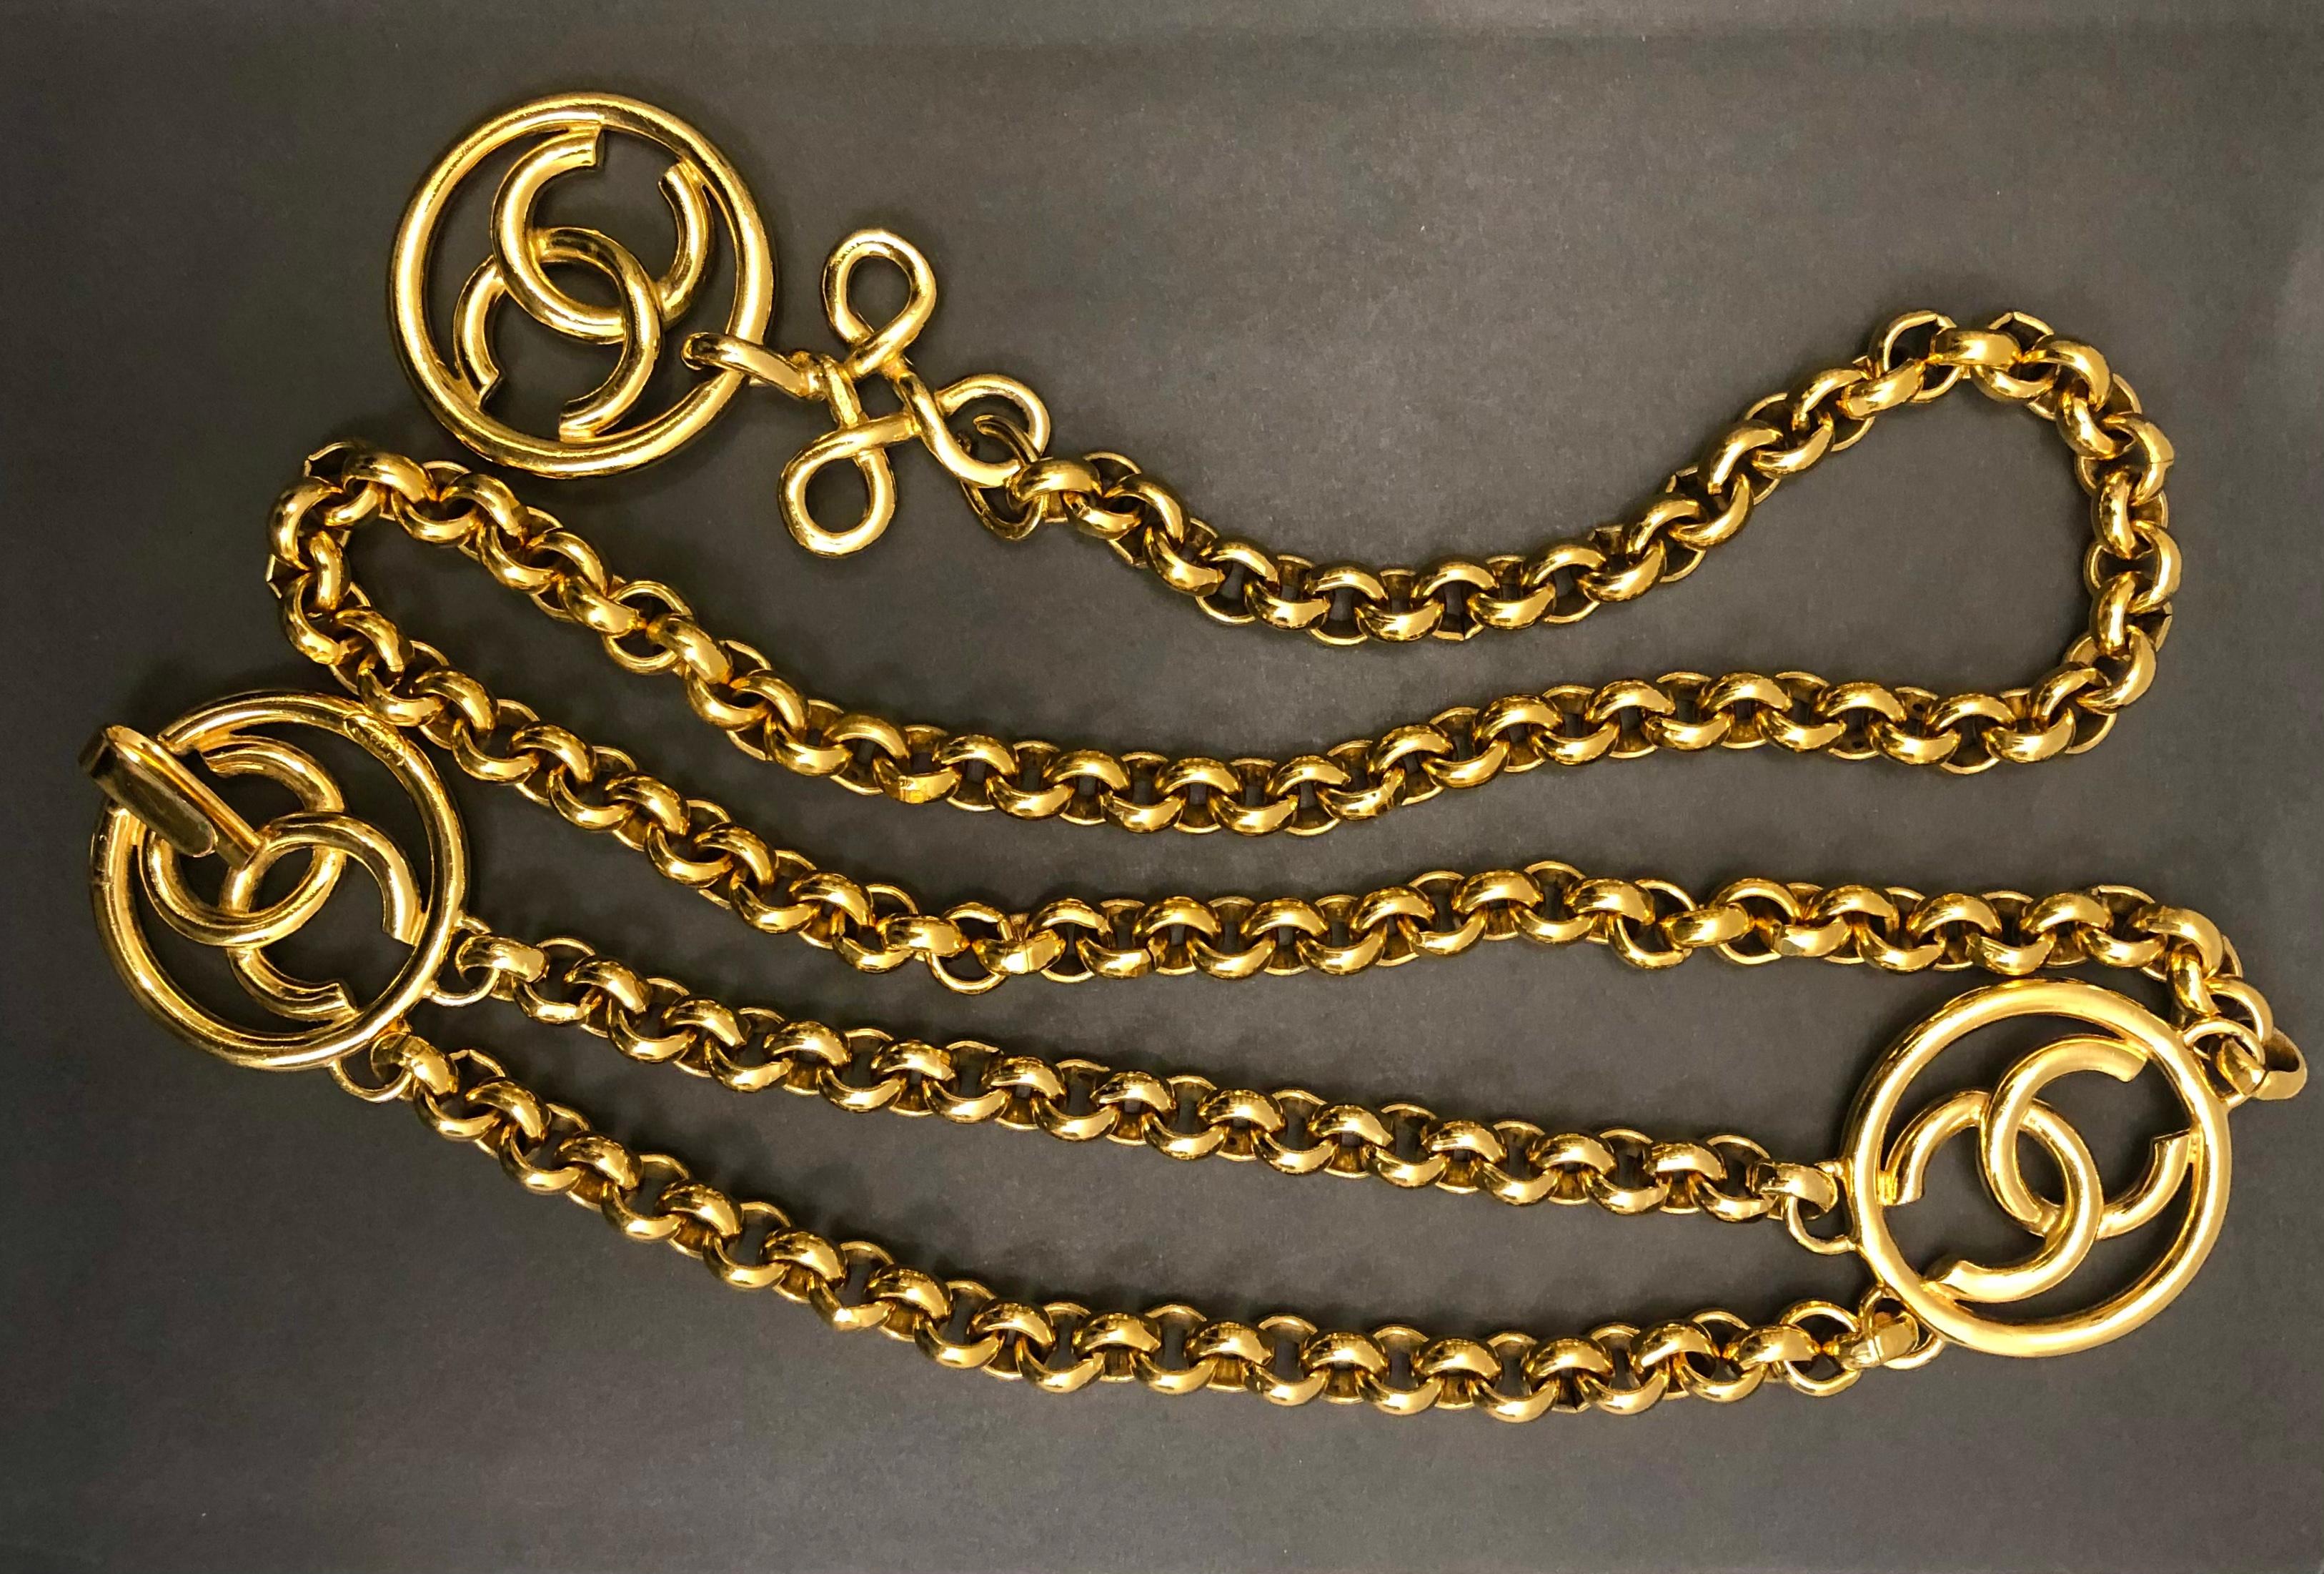 1993 Vintage CHANEL Gold Toned Clover CC Chain Belt 40 Inches Long 1